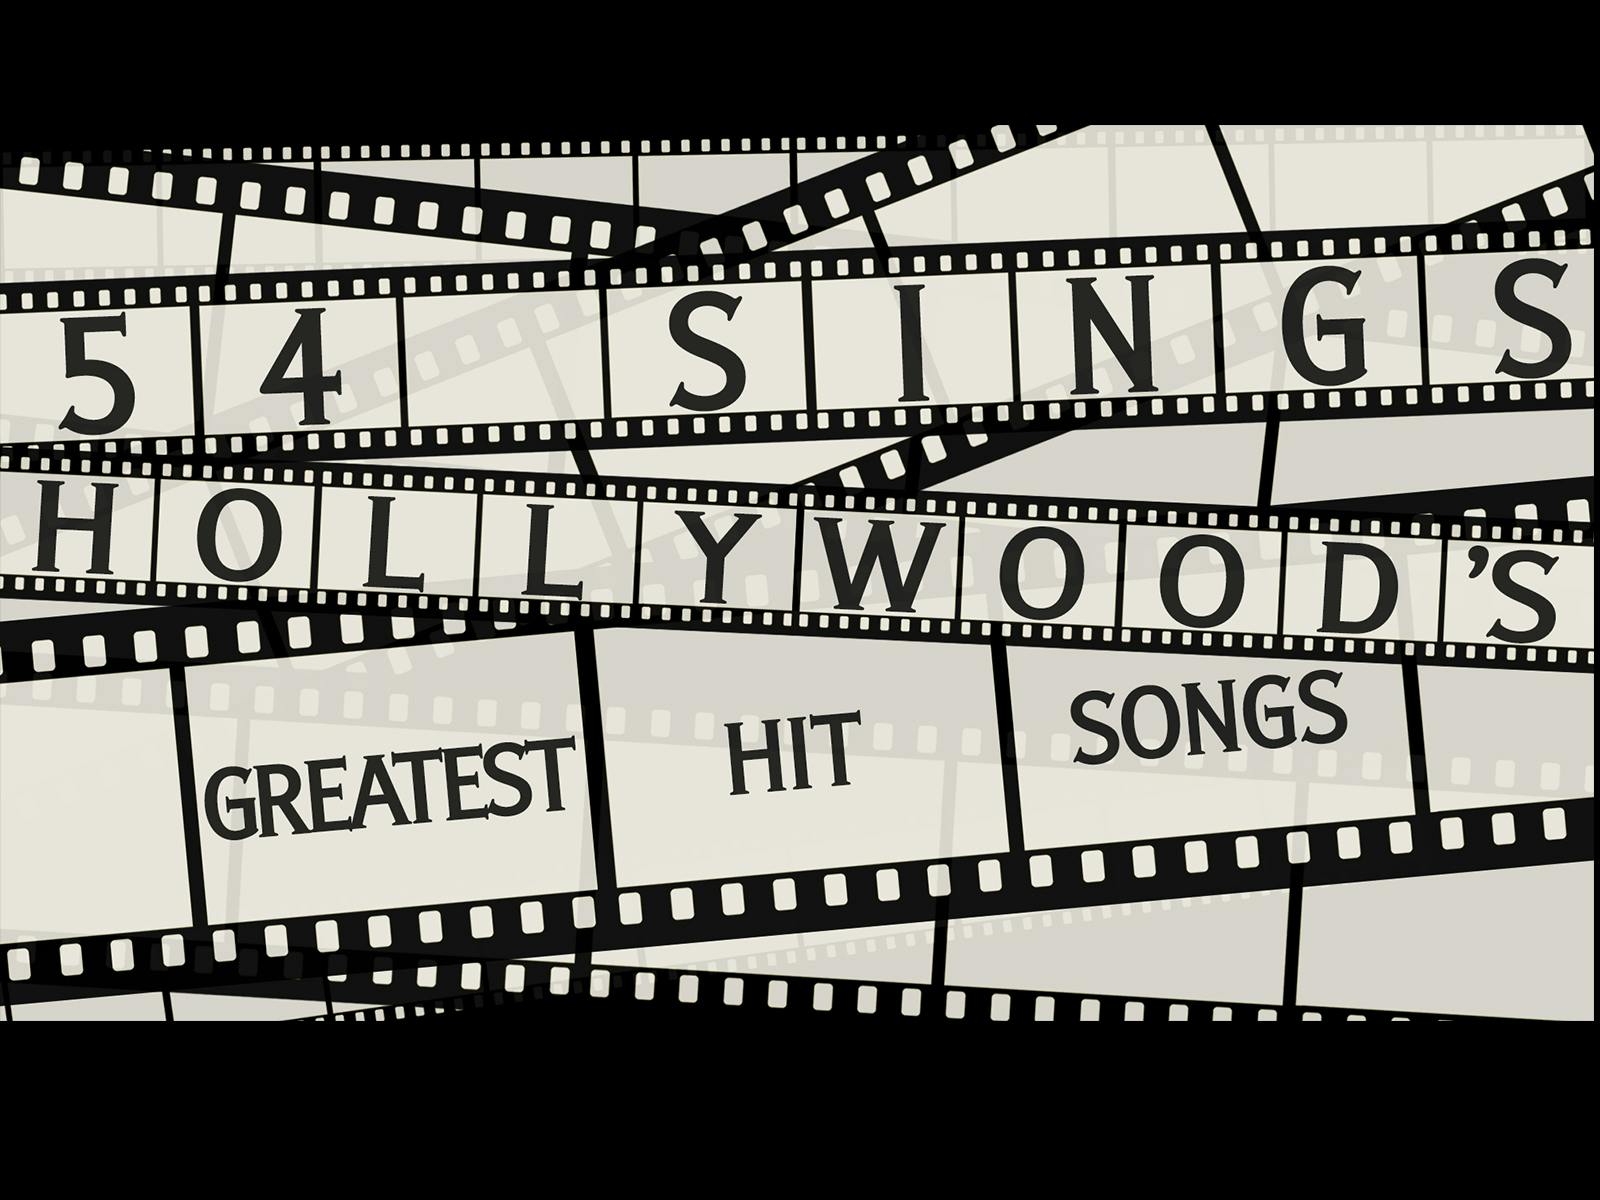 54 Sings Hollywood's Greatest Hit Songs! Tickets New York TodayTix